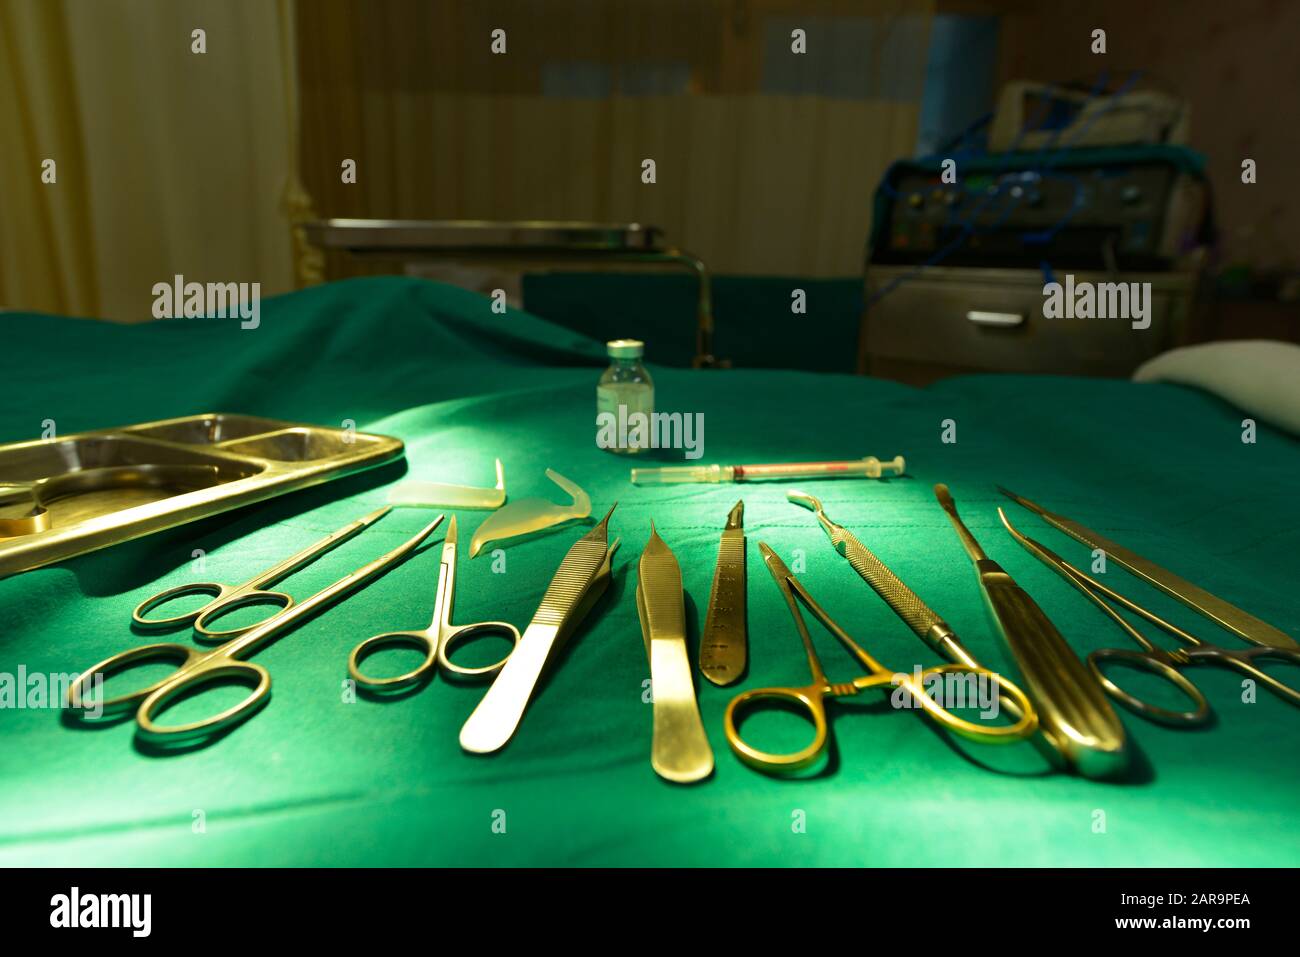 Surgical instruments, silicone nasal implants in operating room. Stock Photo